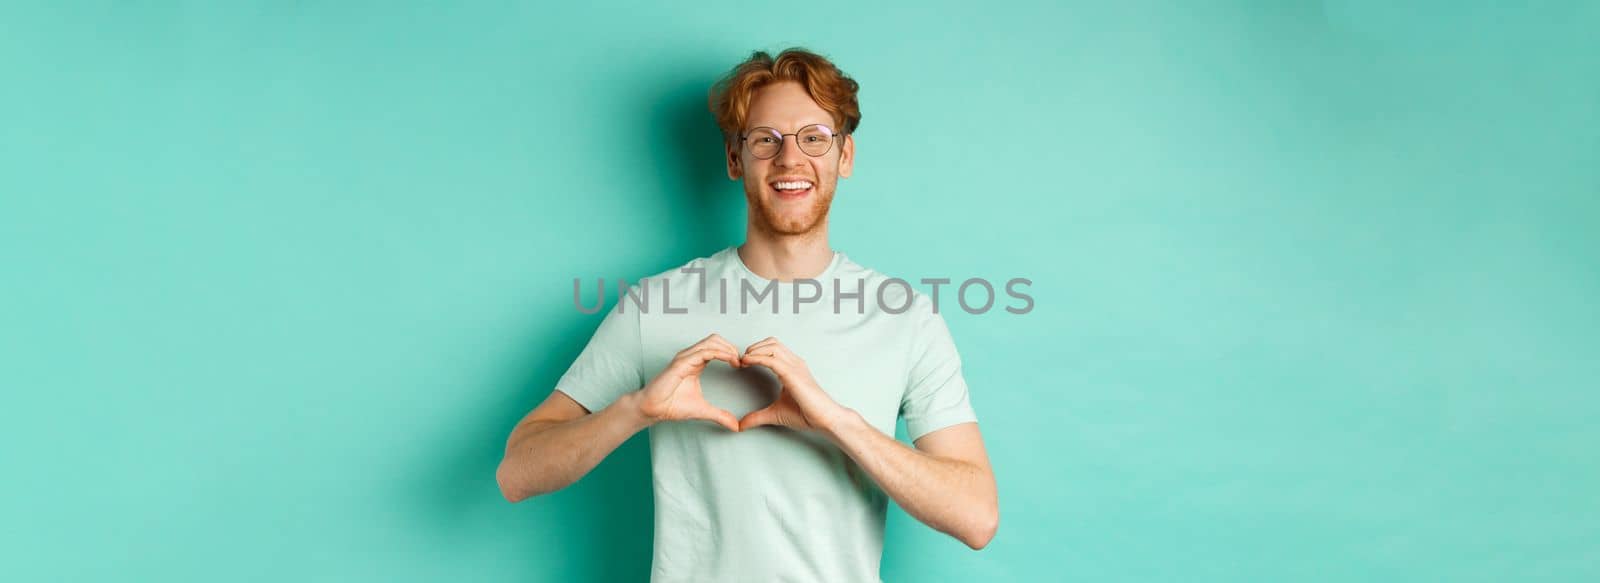 Valentines day and relationship concept. Happy boyfriend with red hair and beard, wearing glasses and t-shirt, showing heart sign and saying I love you, standing over turquoise background.